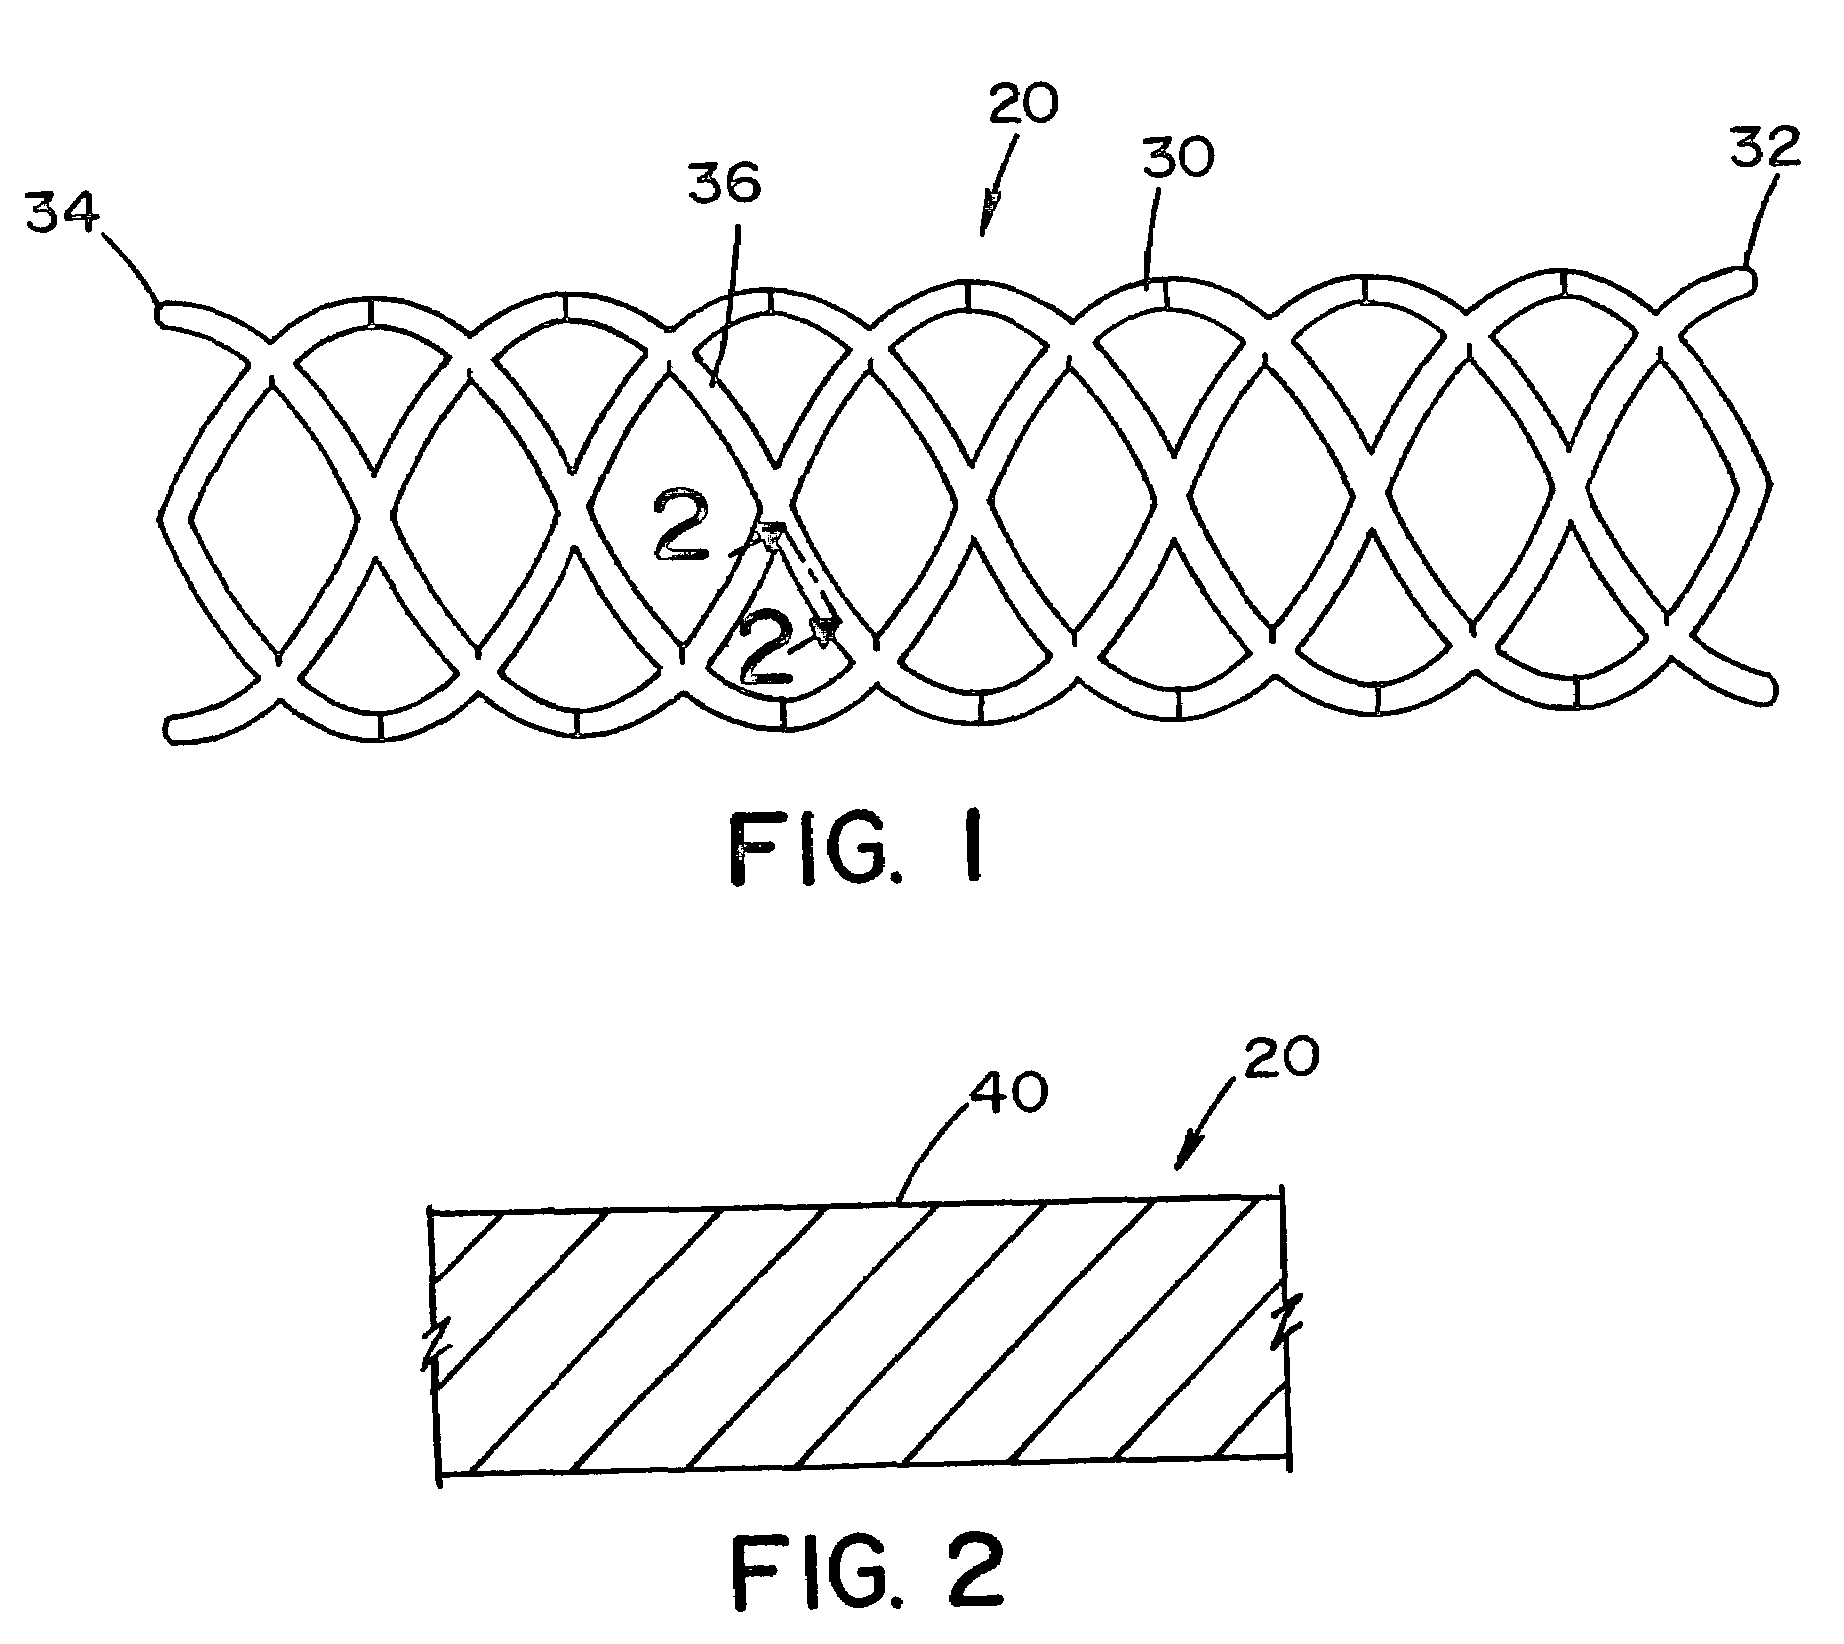 Metal alloy for a stent